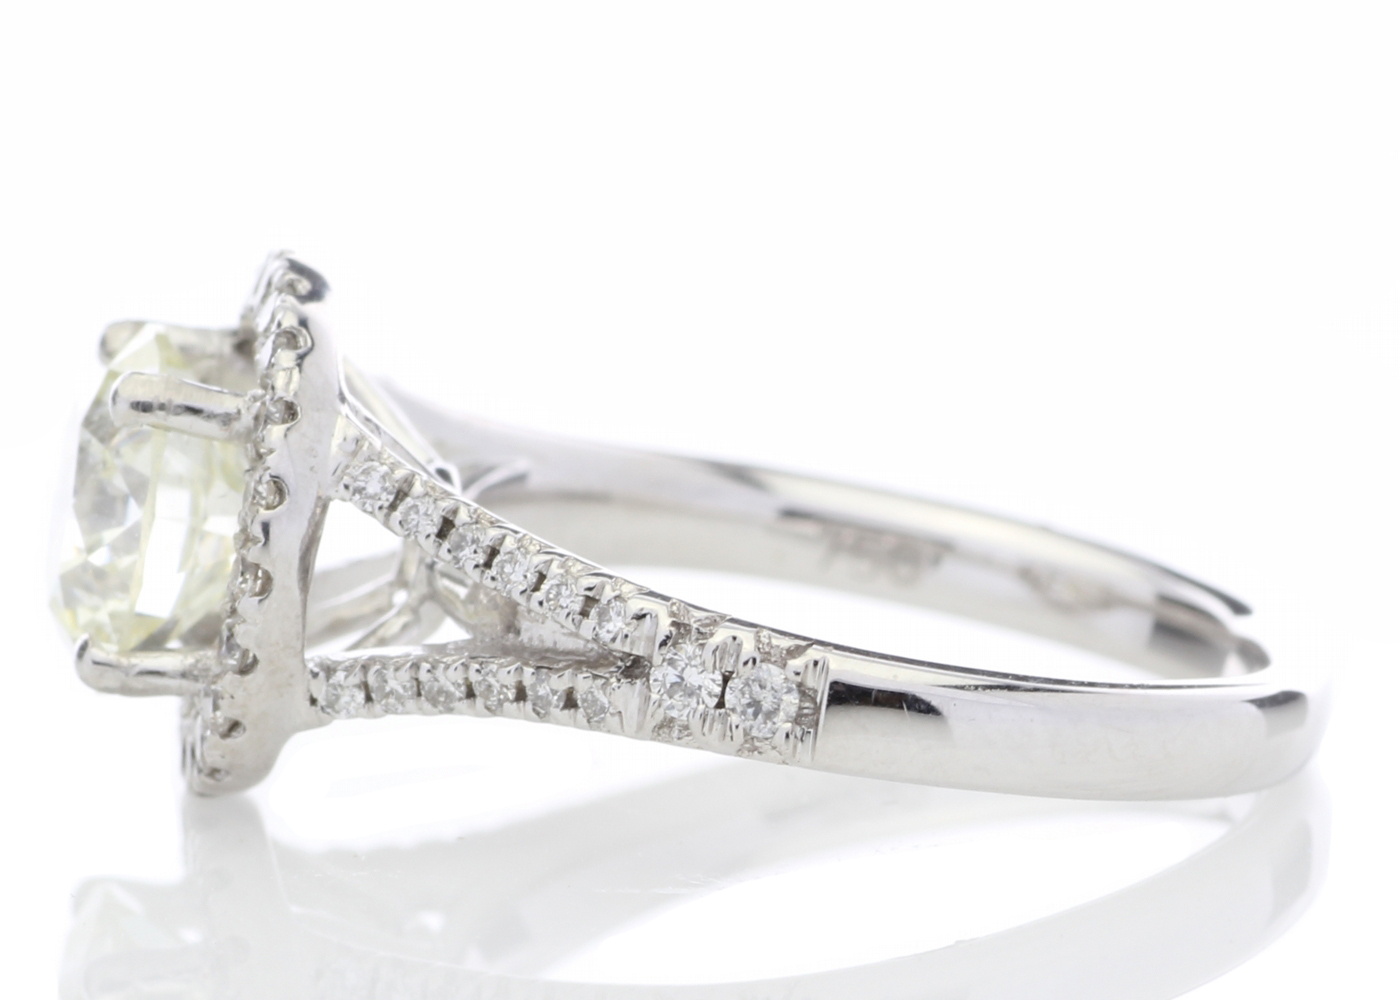 18ct White Gold Single Stone With Halo Setting Ring (1.64) 1.98 Carats - Image 3 of 5